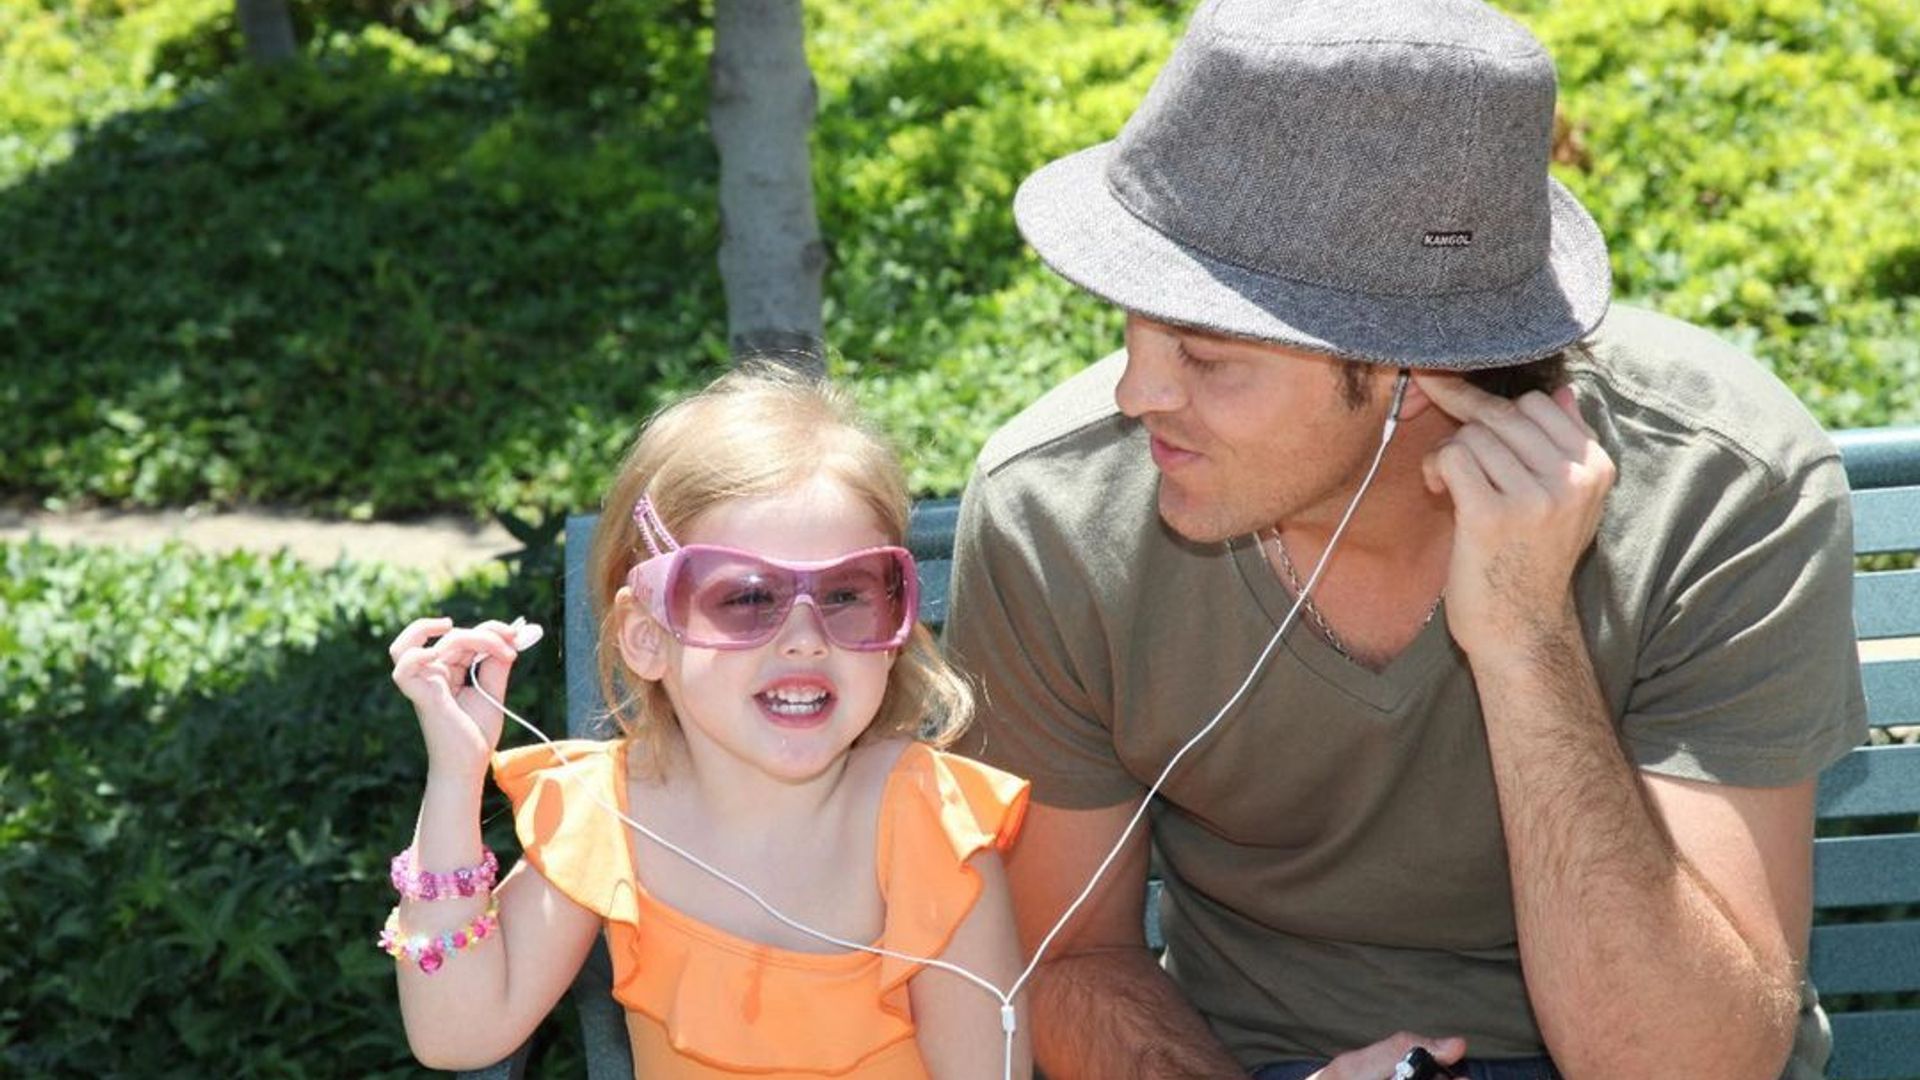 A young Dannielynn sits next to her dad on a bench in a park, sharing headphones with him